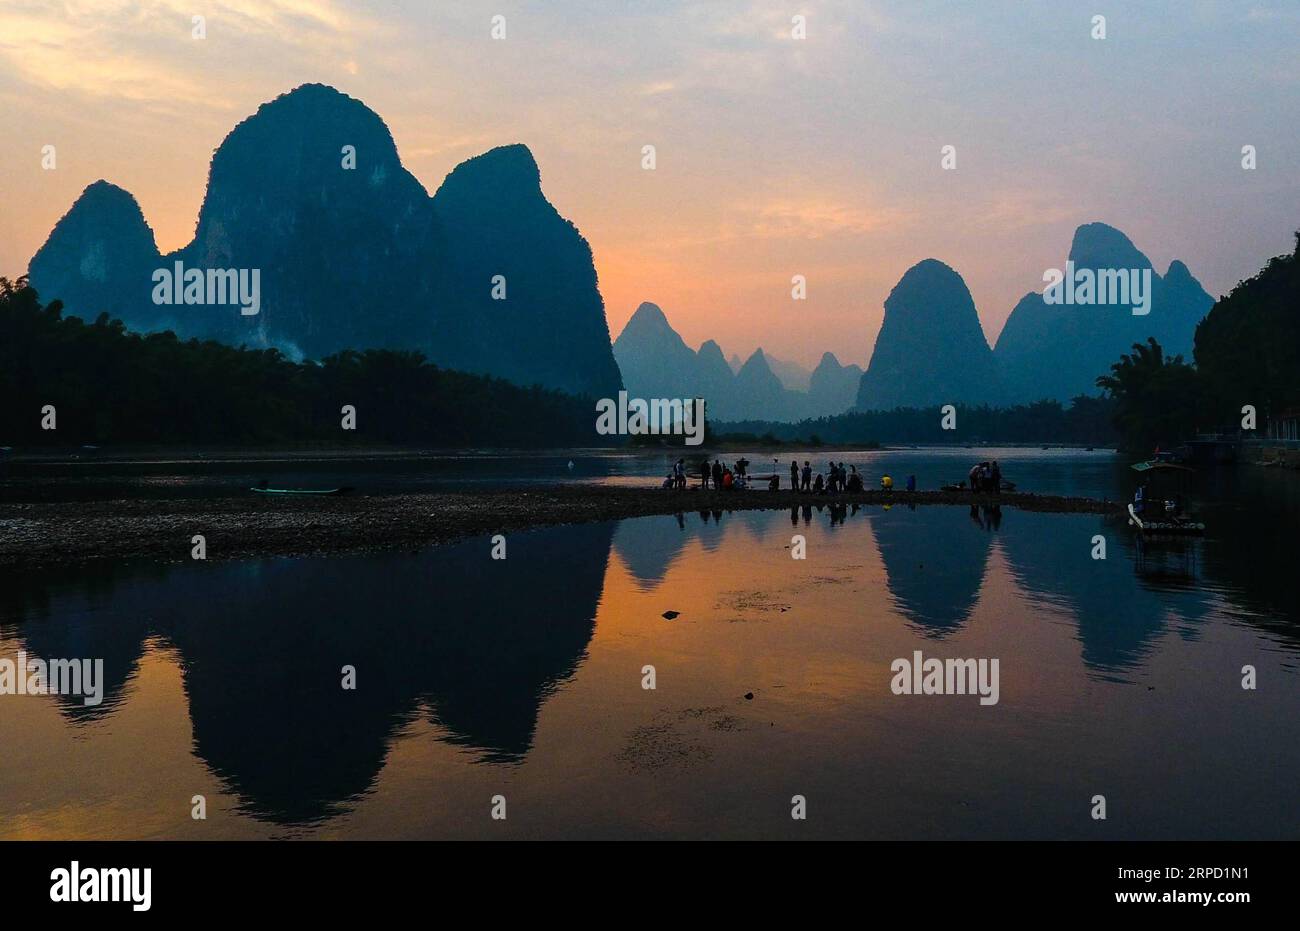 (190719) -- BEIJING, July 19, 2019 -- Aerial photo taken on Oct. 25, 2017 shows the view of Lijiang River in Guilin City, south China s Guangxi Zhuang Autonomous Region. Located in south China, Guangxi boasts high forest coverage of over 62 percent and various landforms including its picturesque karst mountains. In recent years, following the principle of building ecological civilization, Guangxi authorities uphold green development in agricultural production and poverty alleviation. Meanwhile, the authorities take various measures to improve rural environment including expanding forest covera Stock Photo